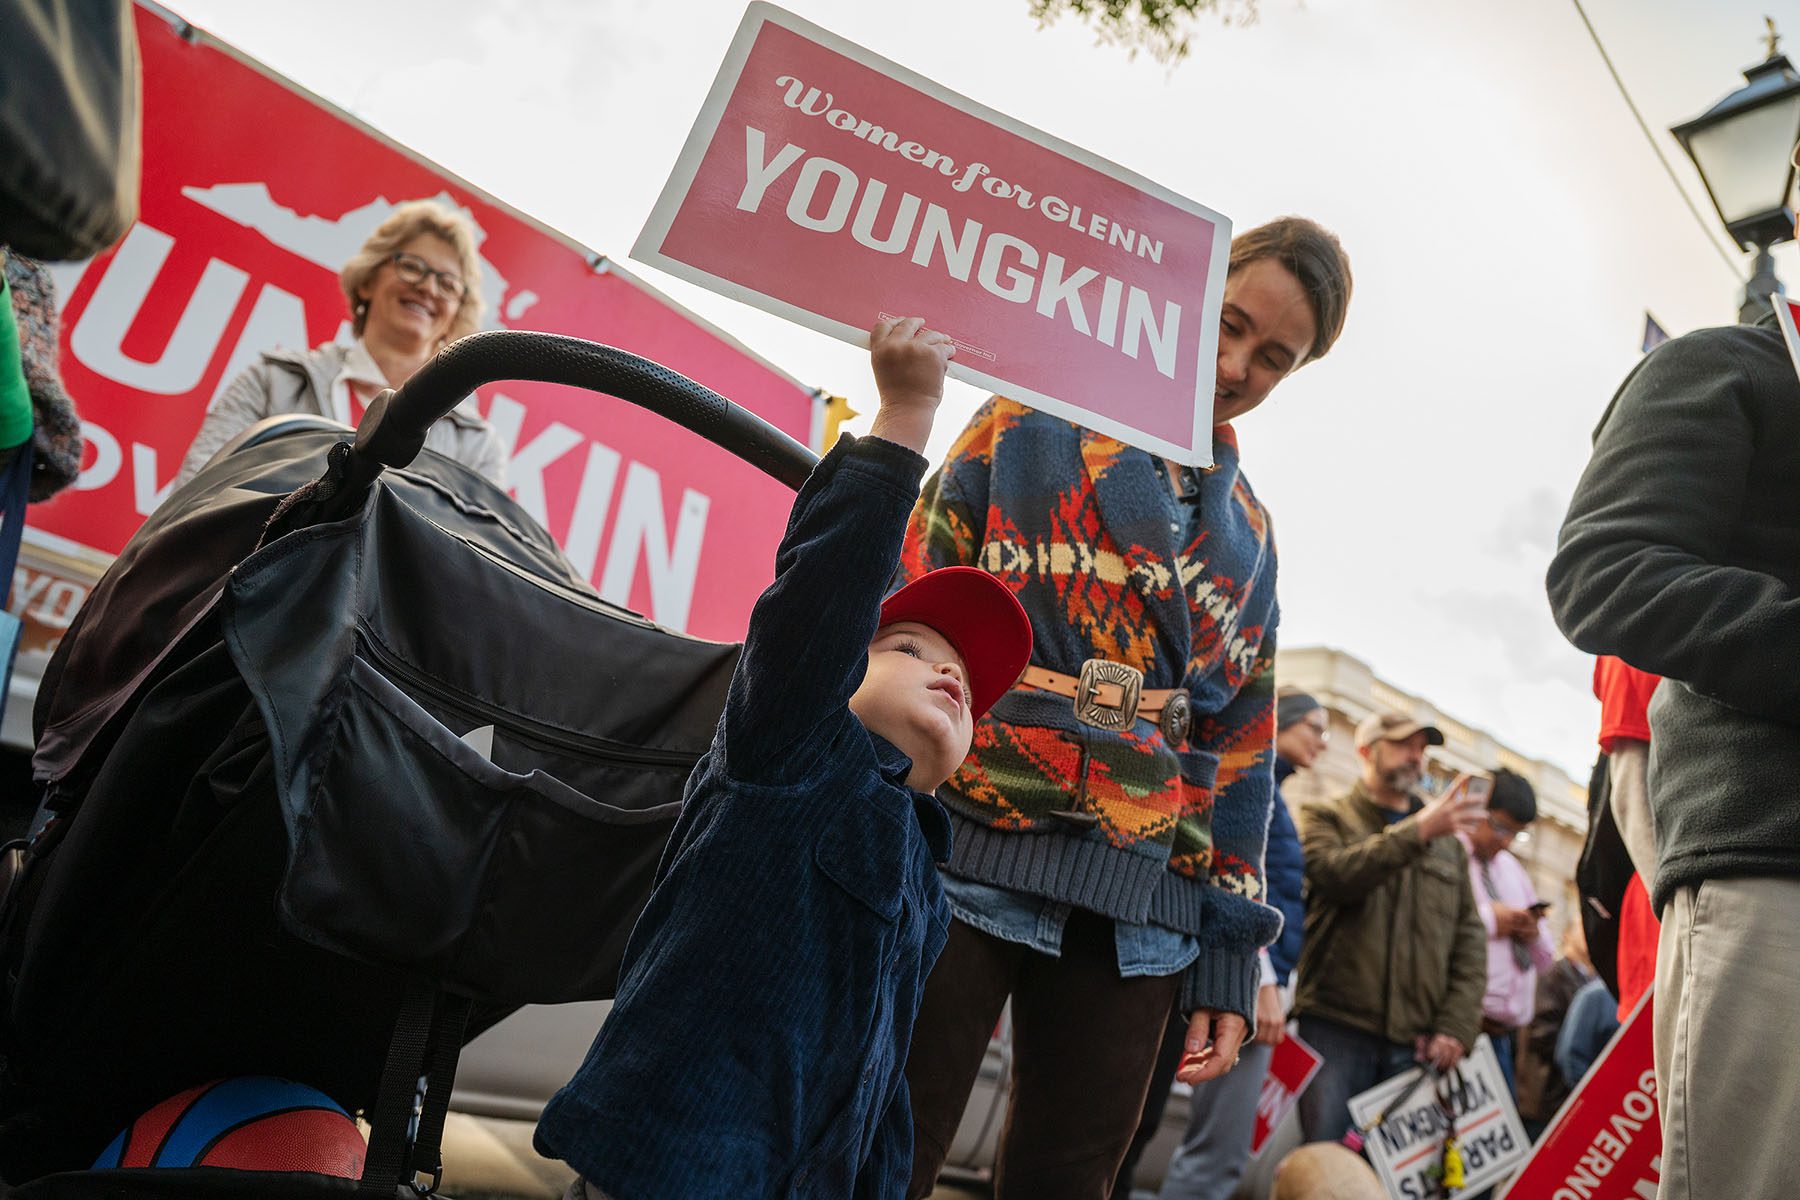 A child holds up a campaign sign tht reads "Women for Glenn Youngkin" at a campaign rally.